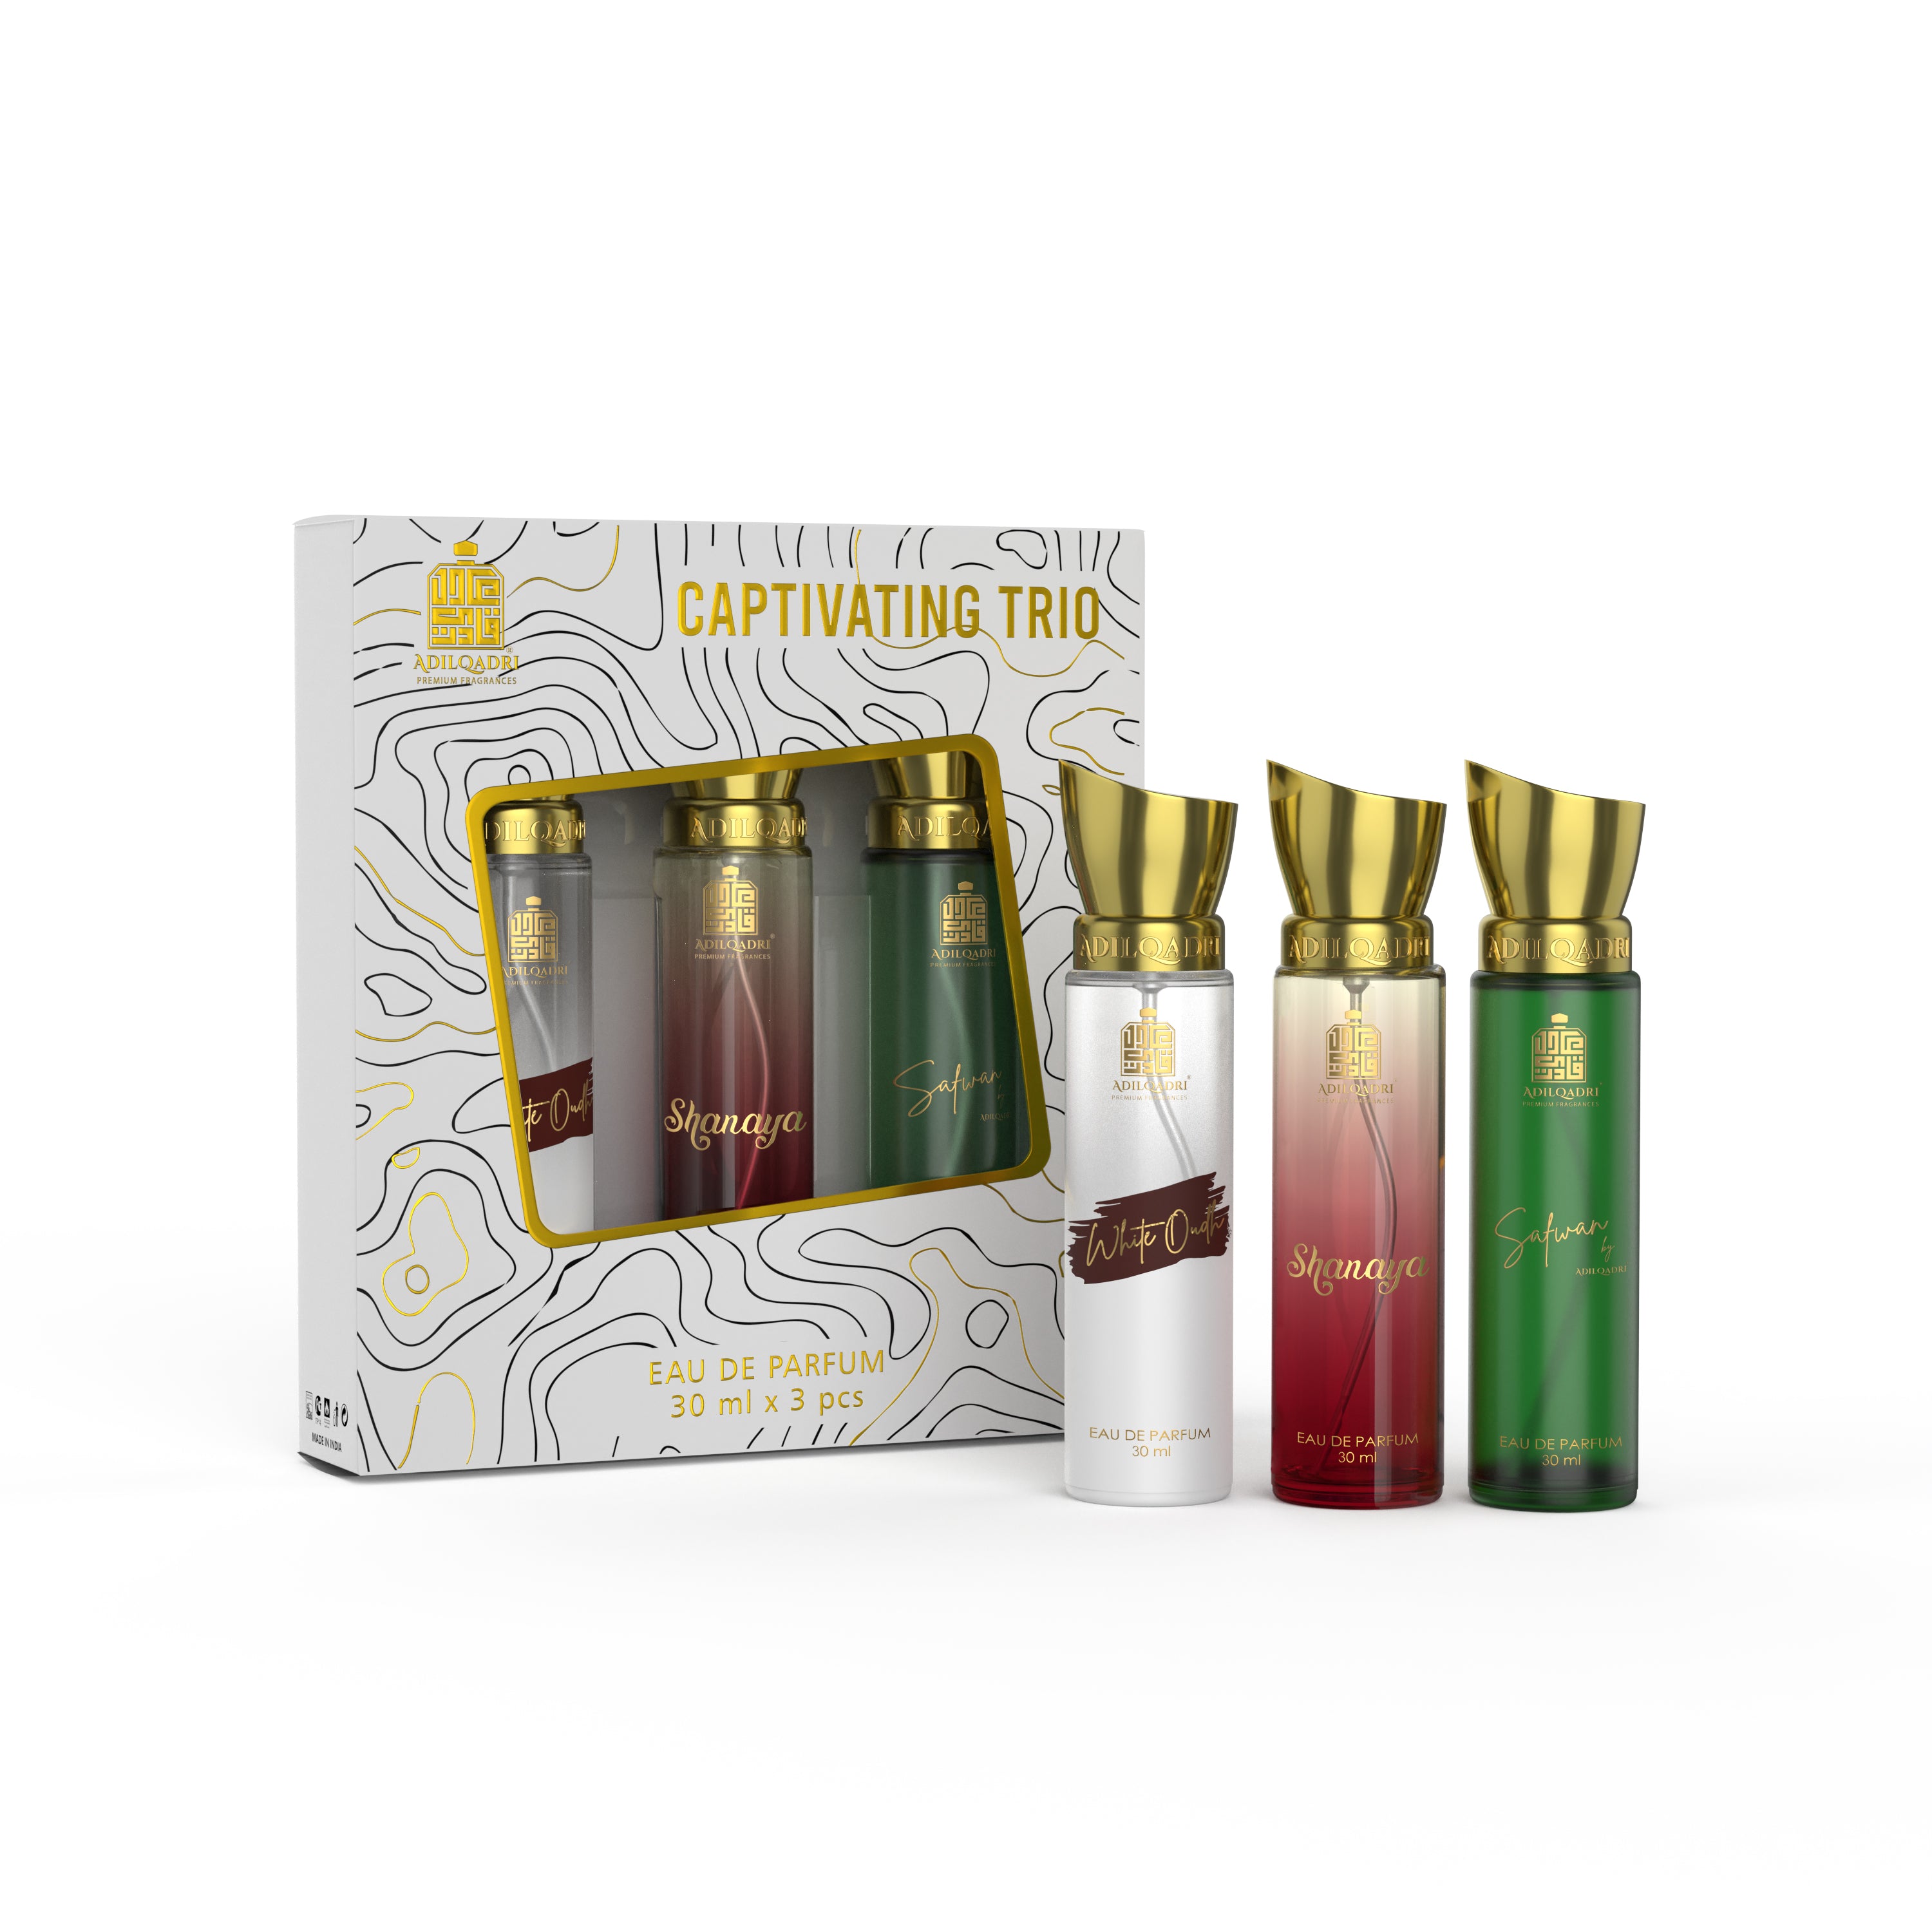 Diwali Candle Gift Set - 12 Luxury Scented Glass Candles